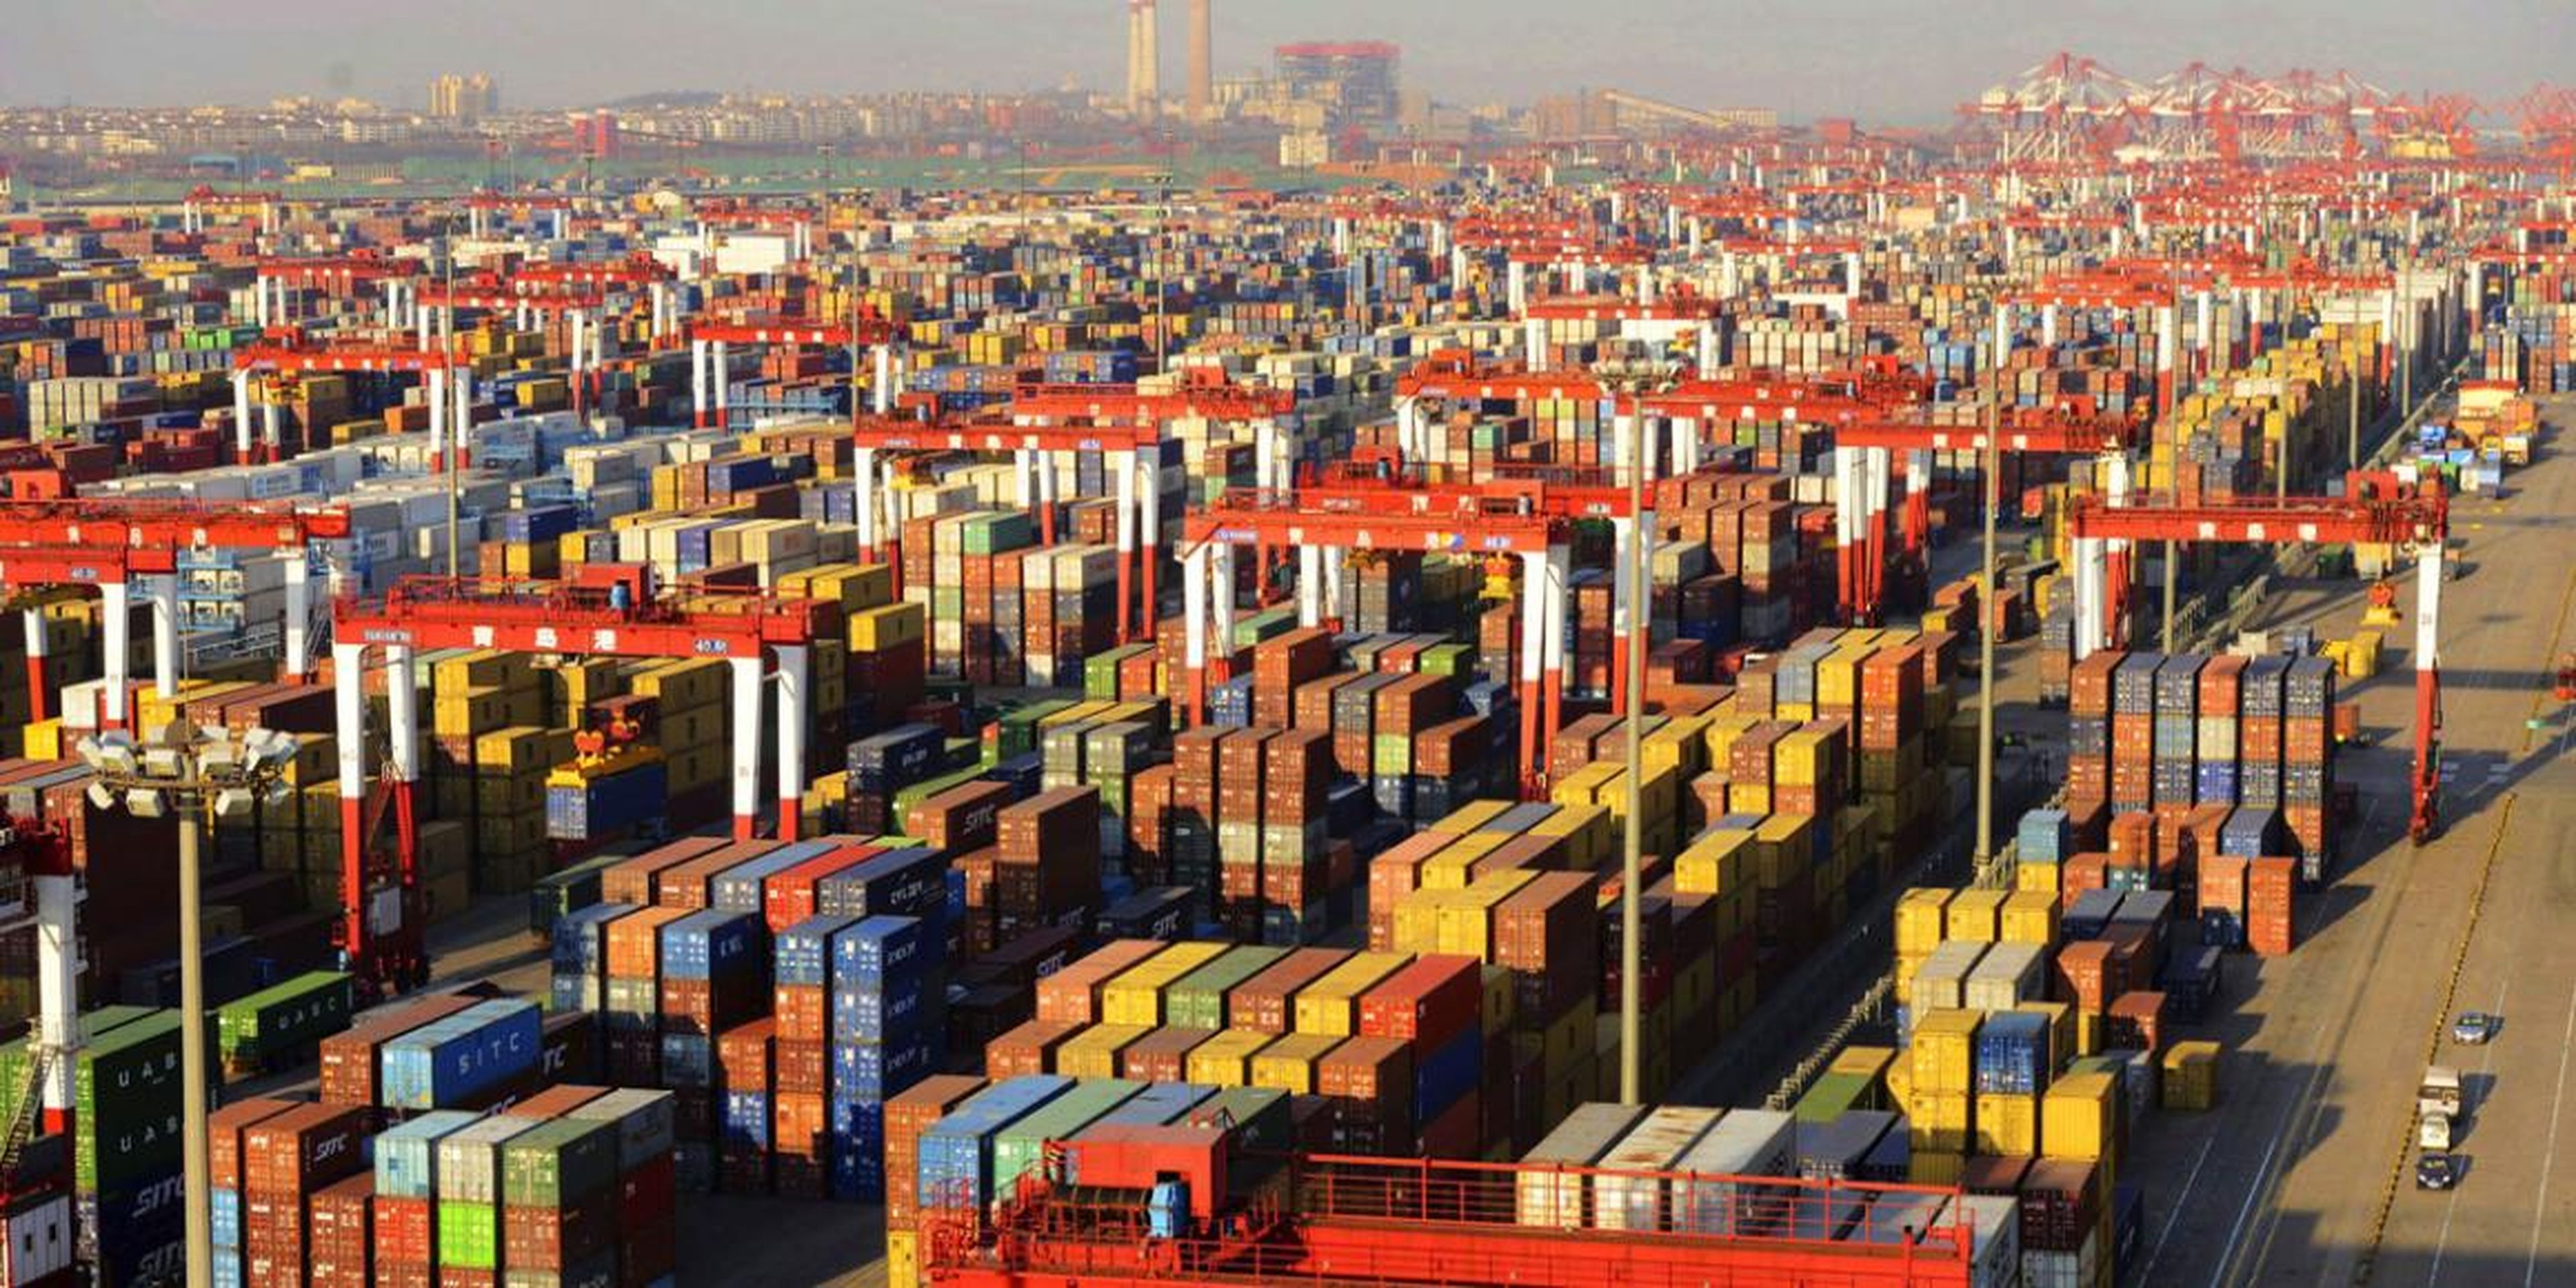 Shipping containers are seen piled up at a port in Qingdao, Shandong province December 10, 2013.